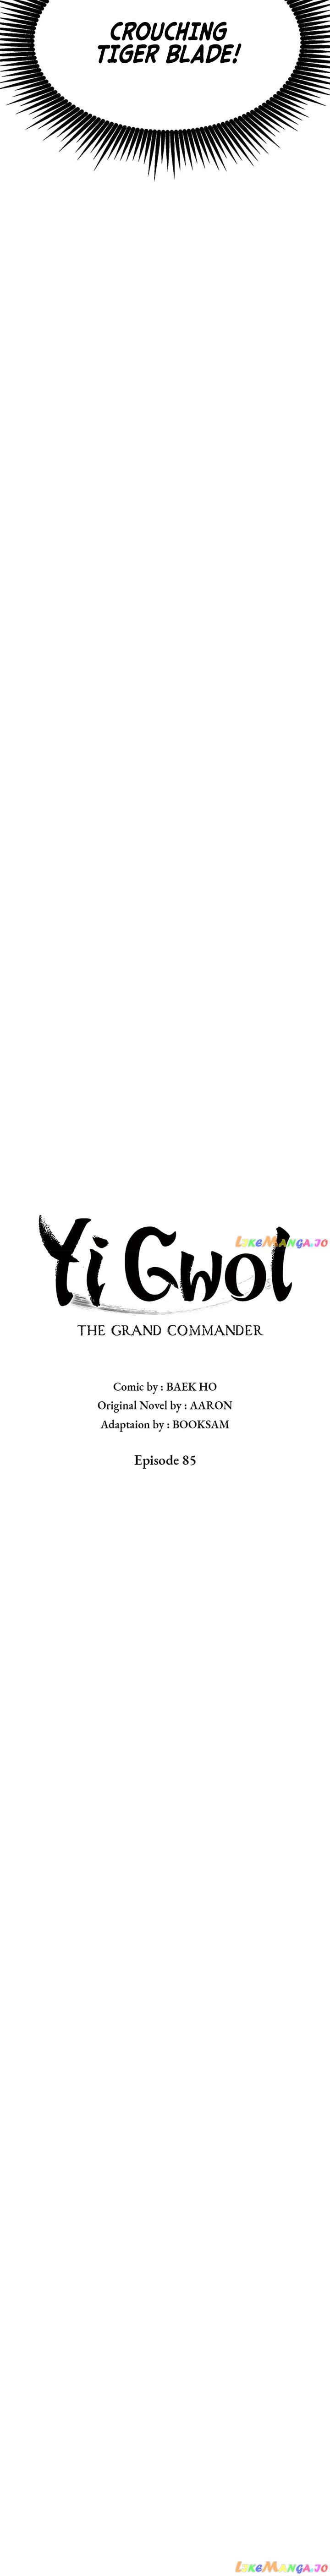 Grand General Chapter 85